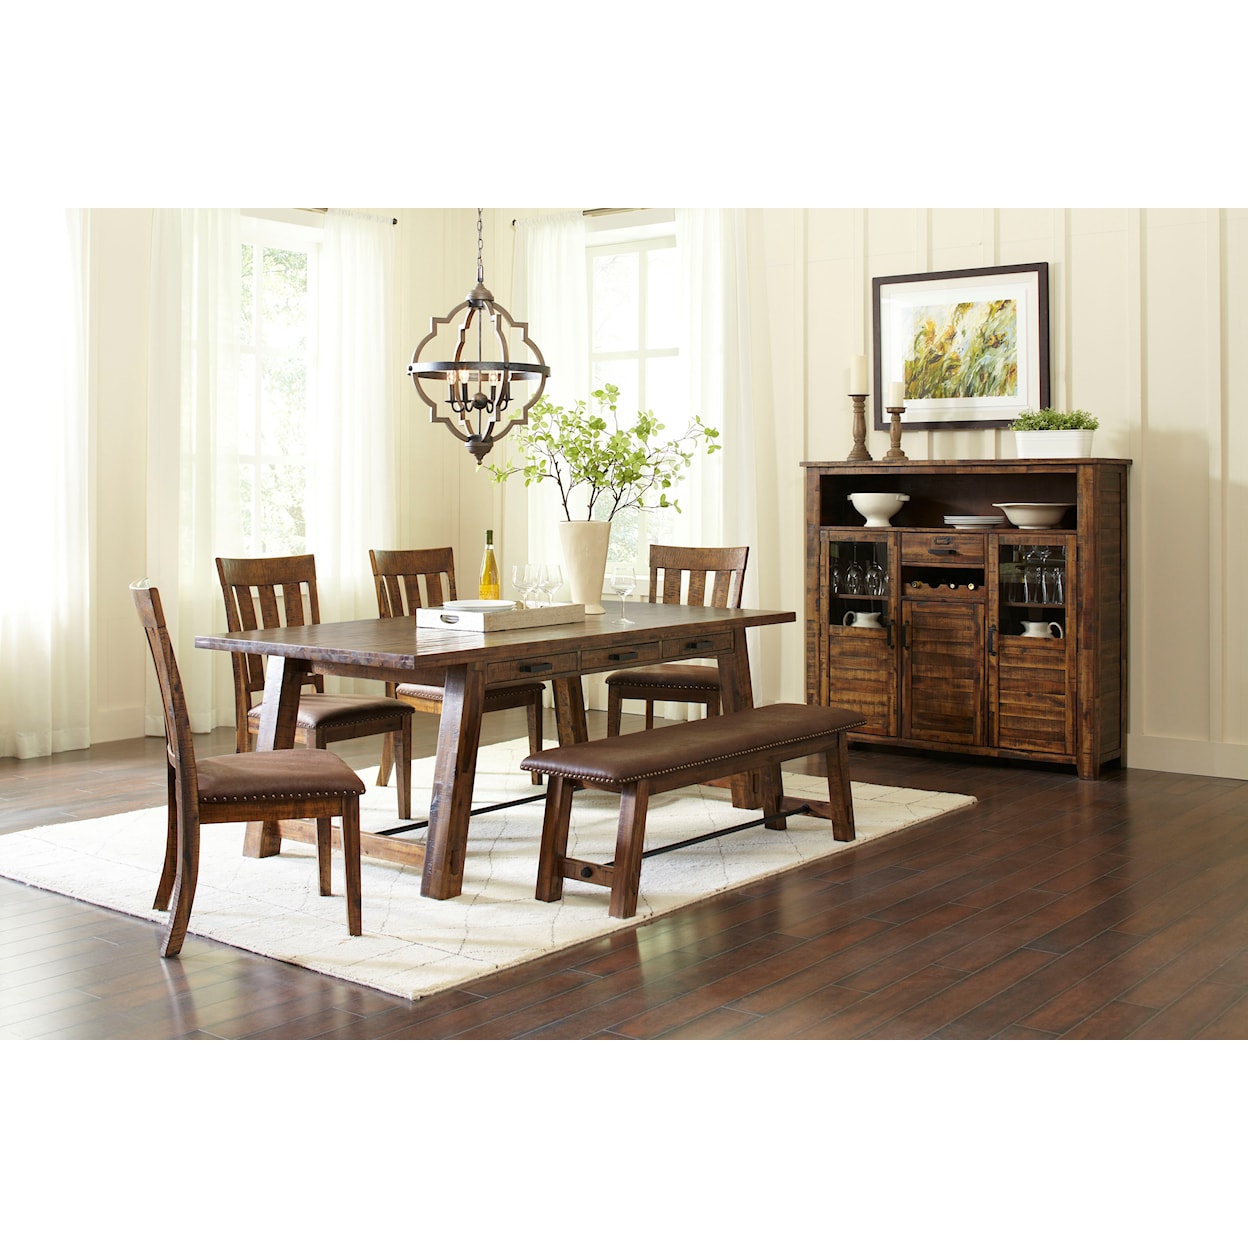 Jofran Cannon Valley Trestle Dining Table and Chair/Bench Set